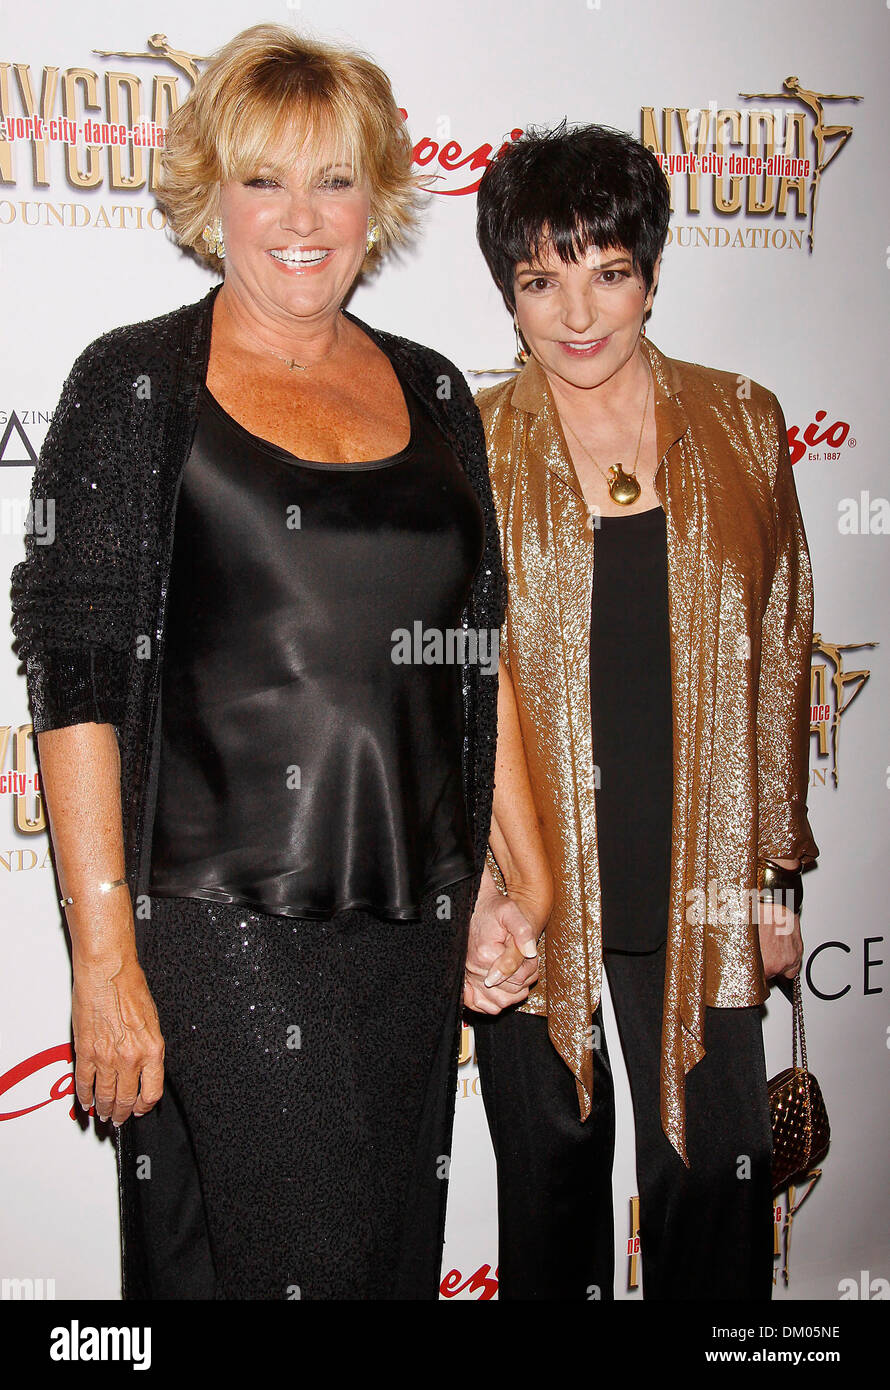 Lorna Luft and her sister Liza Minnelli at NYC Dance Alliance Foundation  Gala held at New York University – Arrivals New York Stock Photo - Alamy